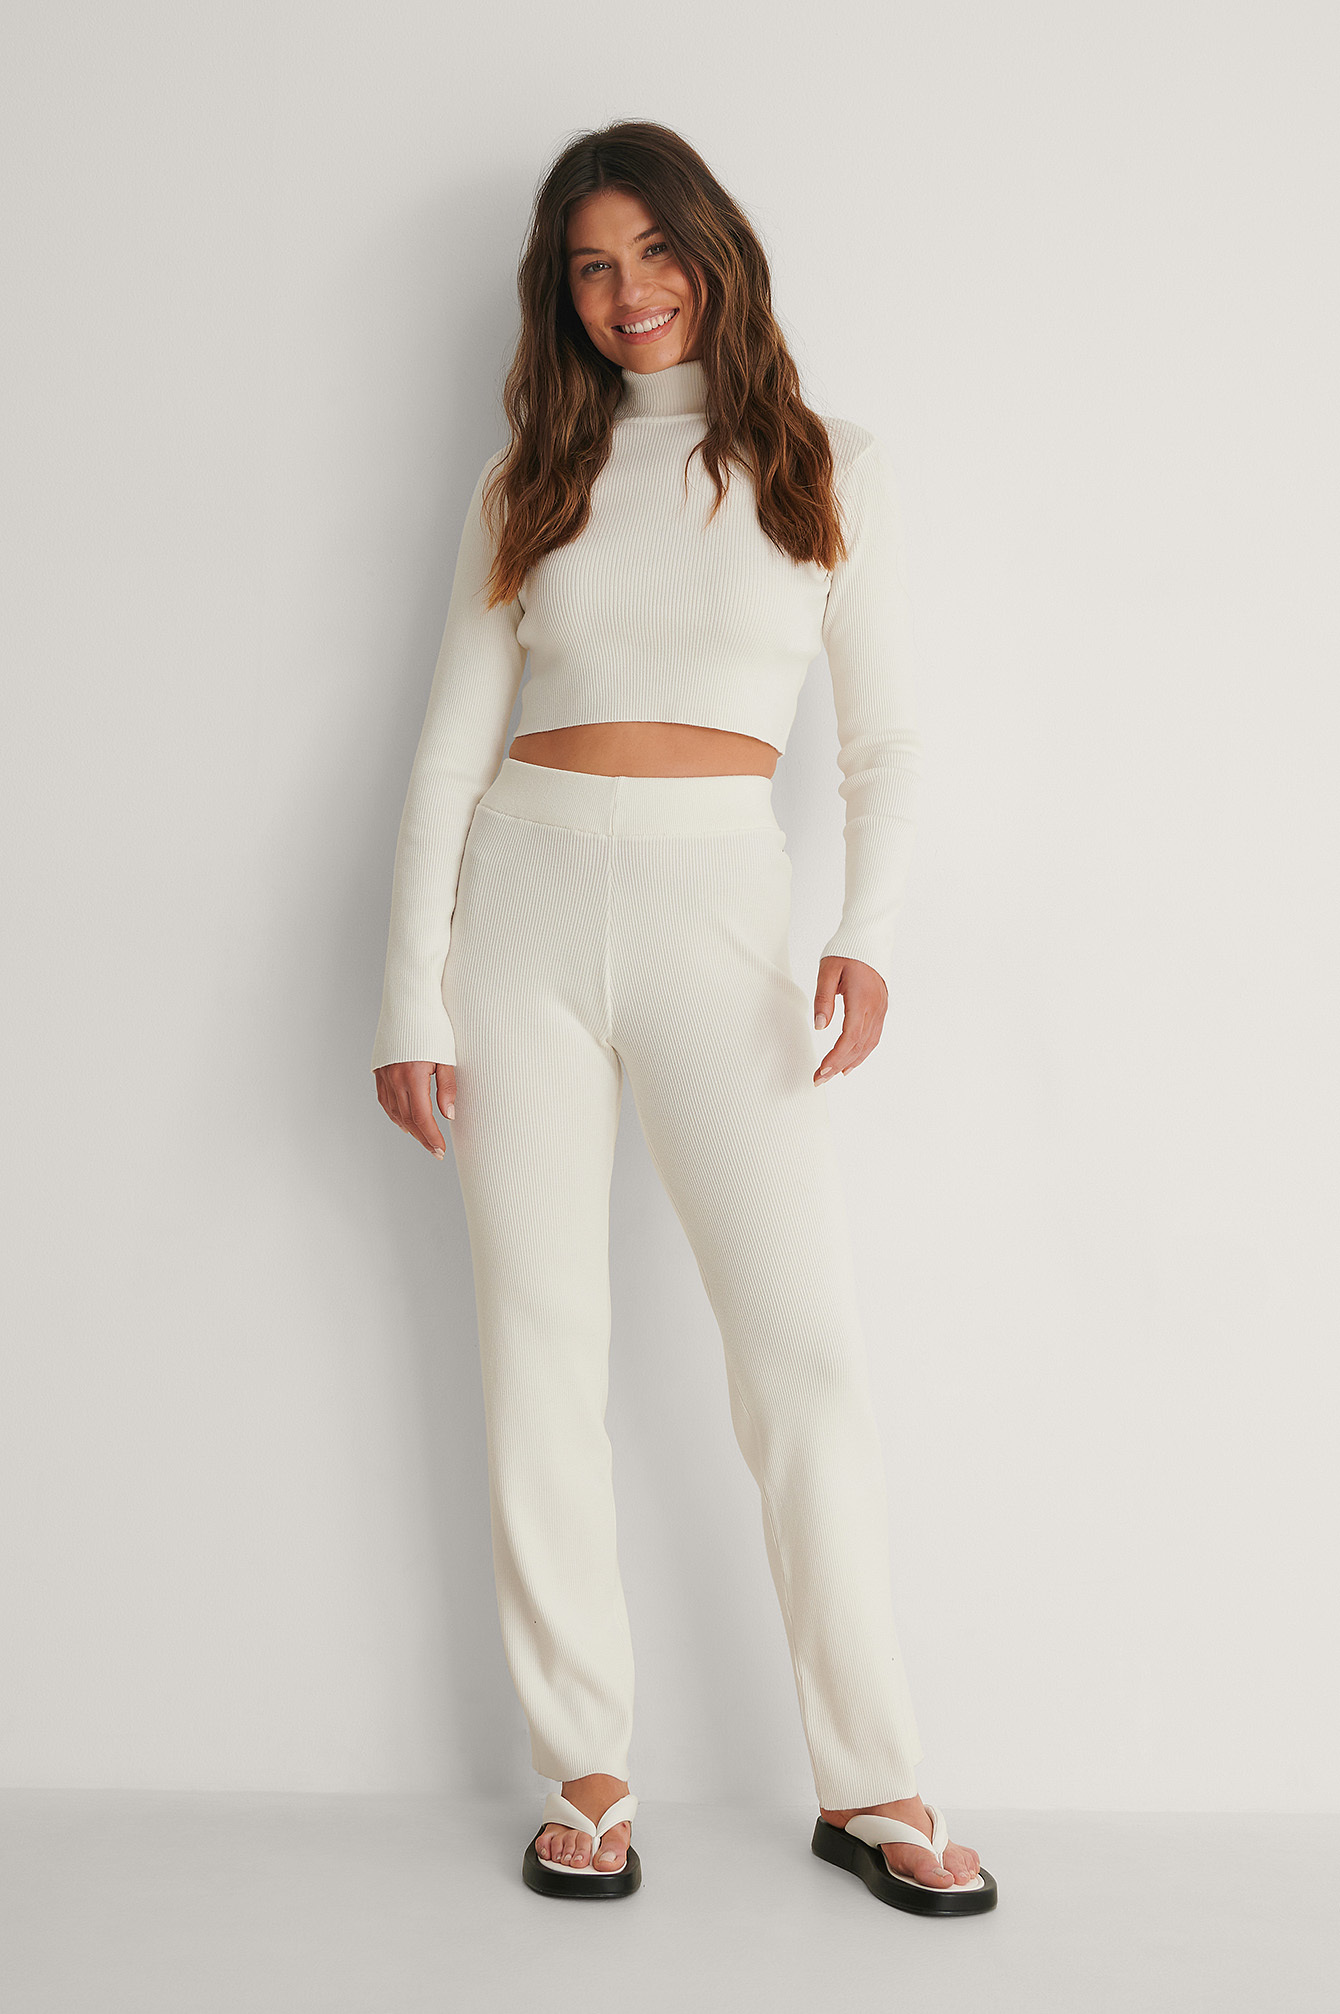 Knitted Ribbed High Waist Pants And High Neck Top Outfit